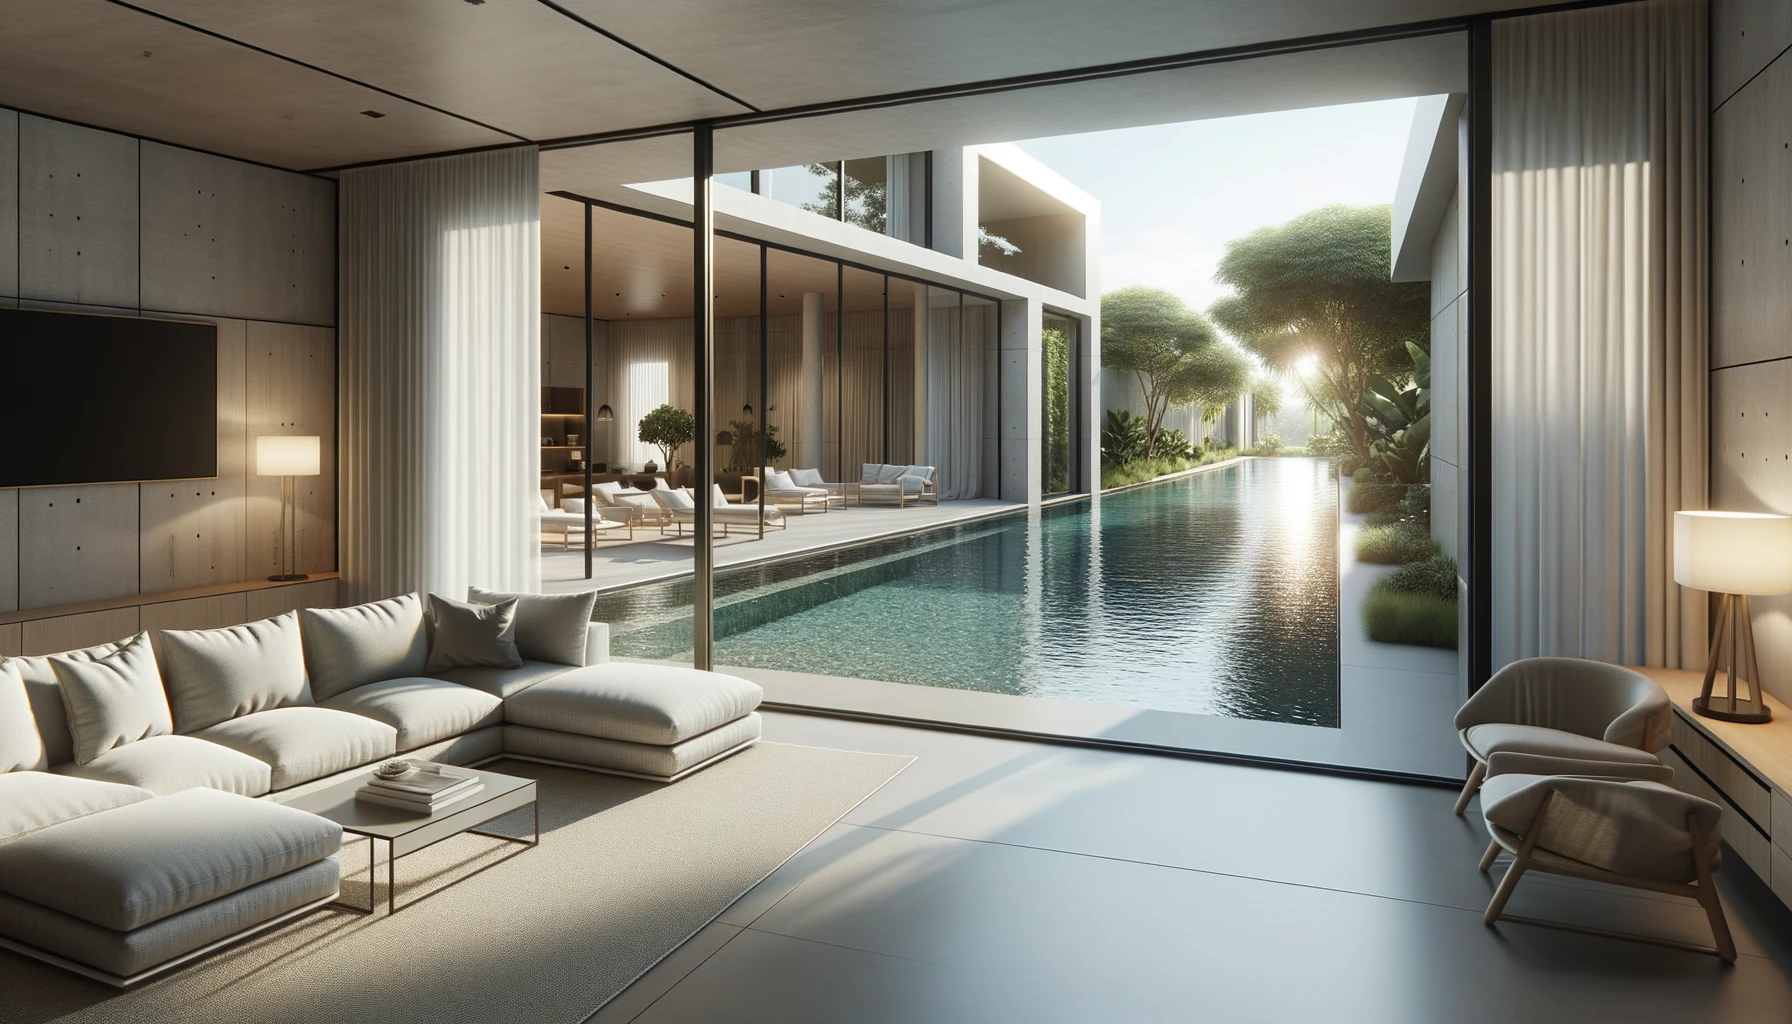 Contemporary living area with clear glass walls providing a view of a lavish backyard pool